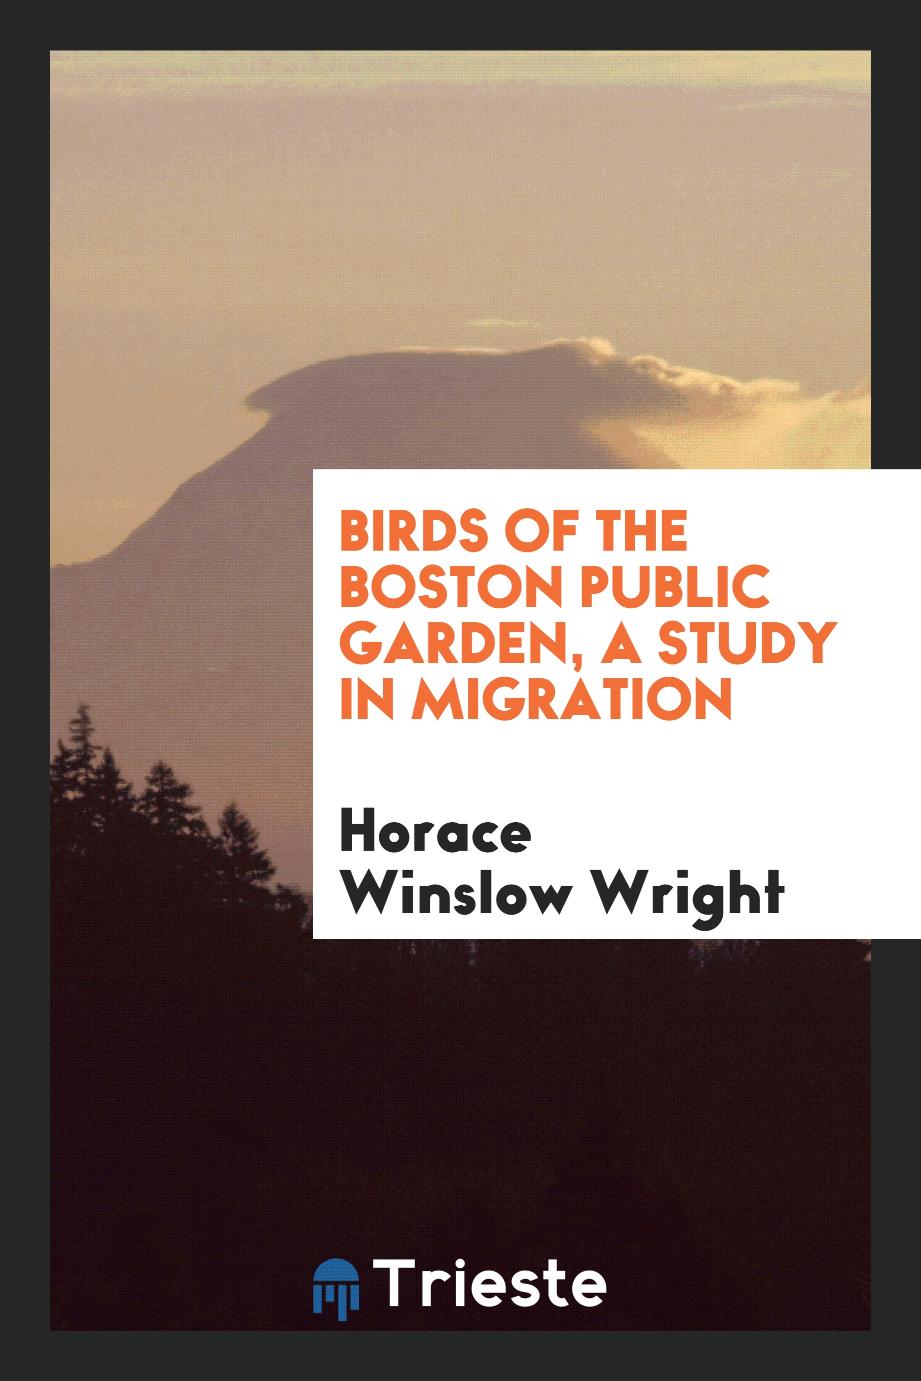 Horace Winslow Wright - Birds of the Boston Public garden, a study in migration